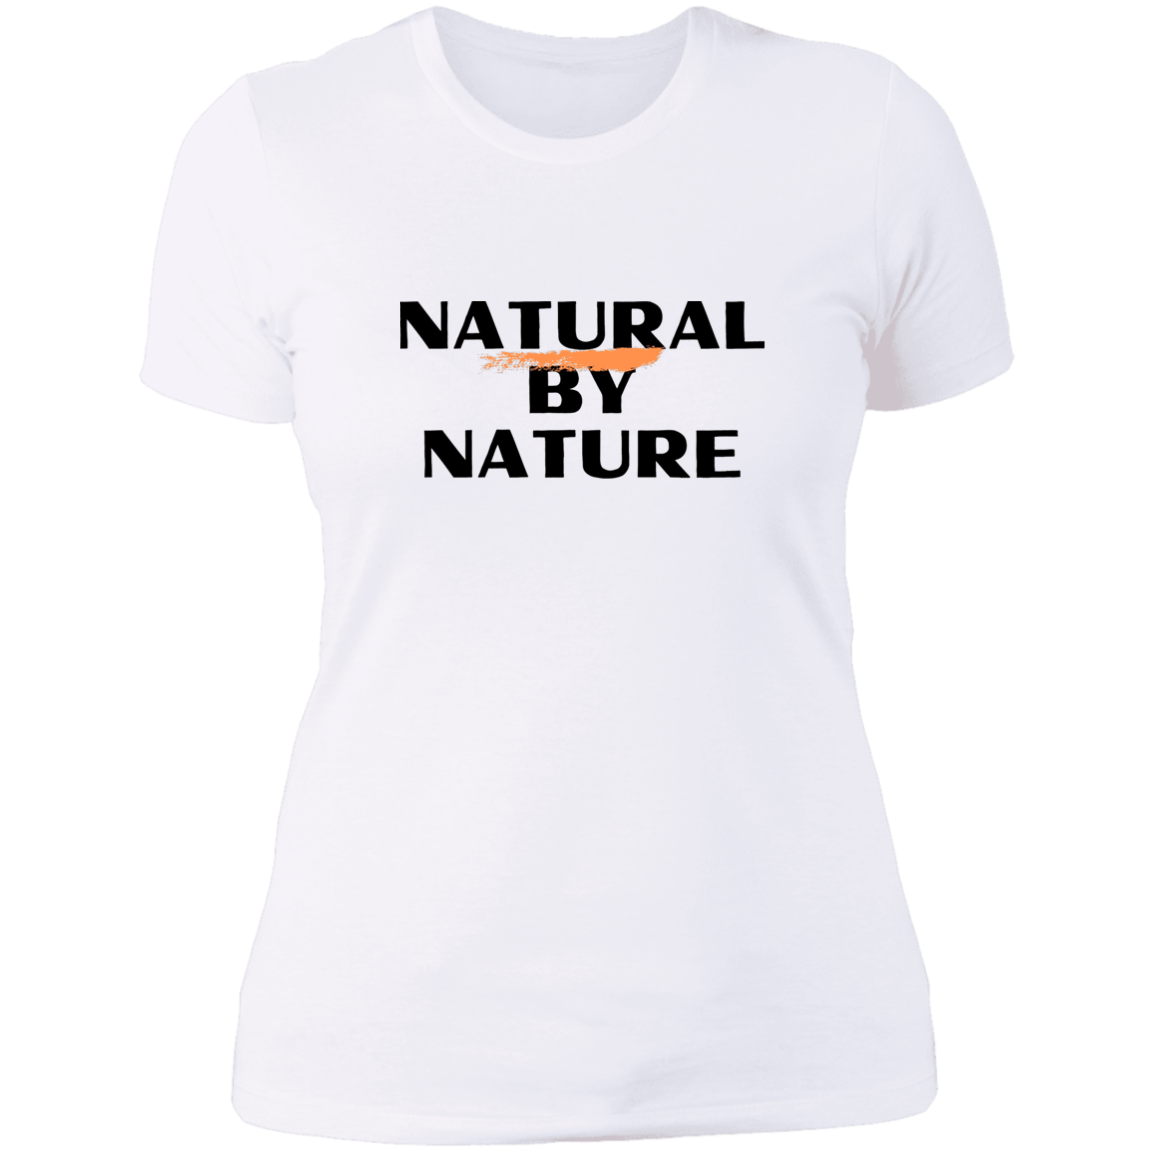 Natural By Nature White T-Shrit